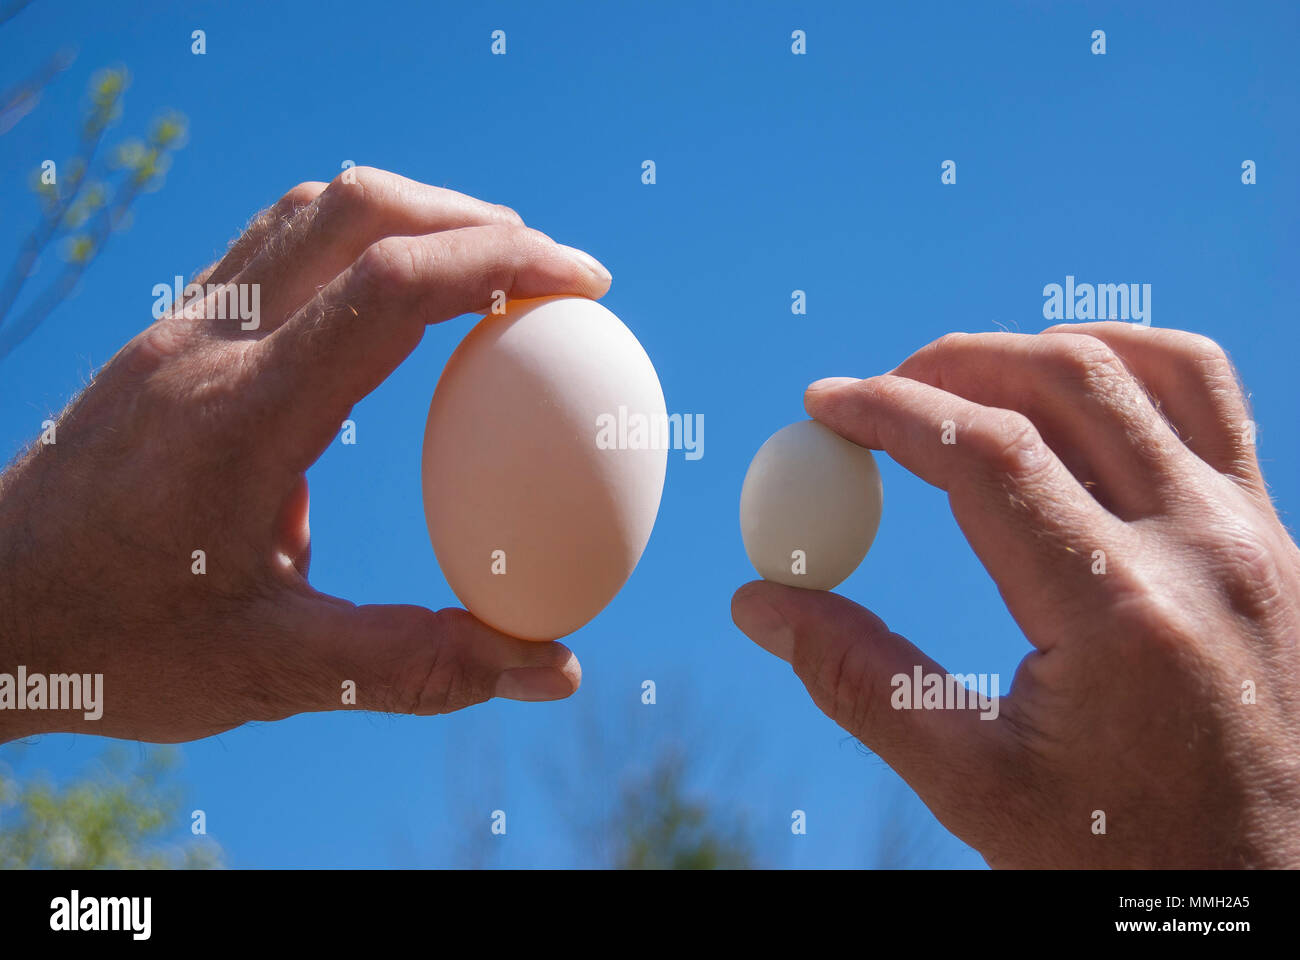 Hands hold two eggs: goose and pigeon against the blue sky. Stock Photo